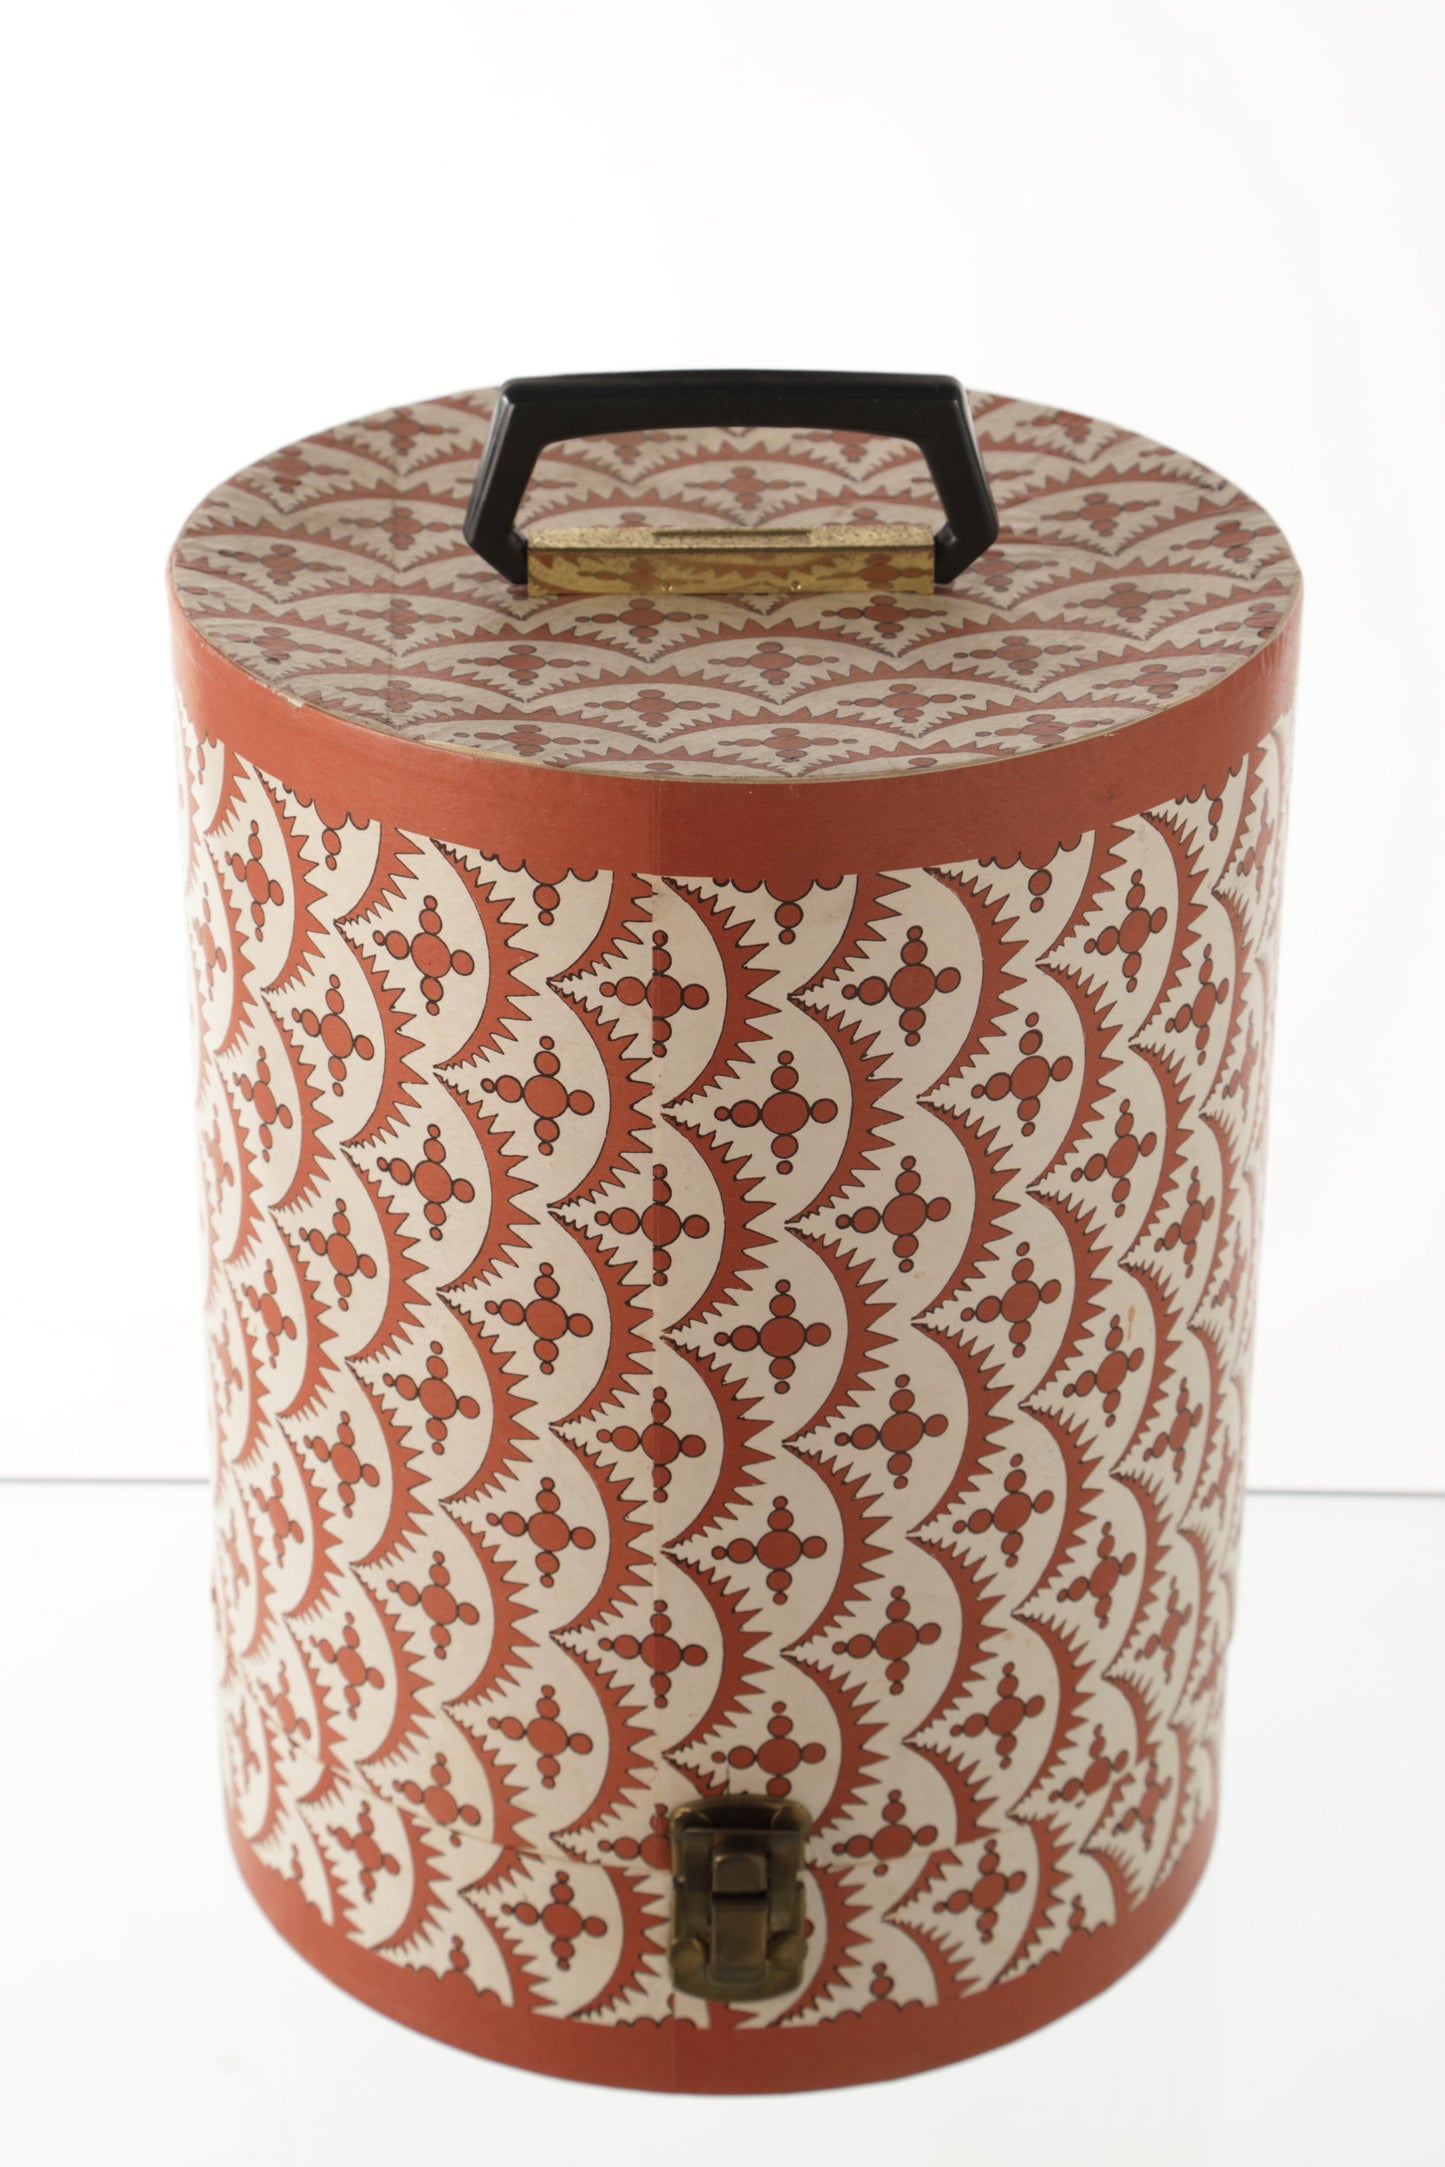 High hat box with printed decoration